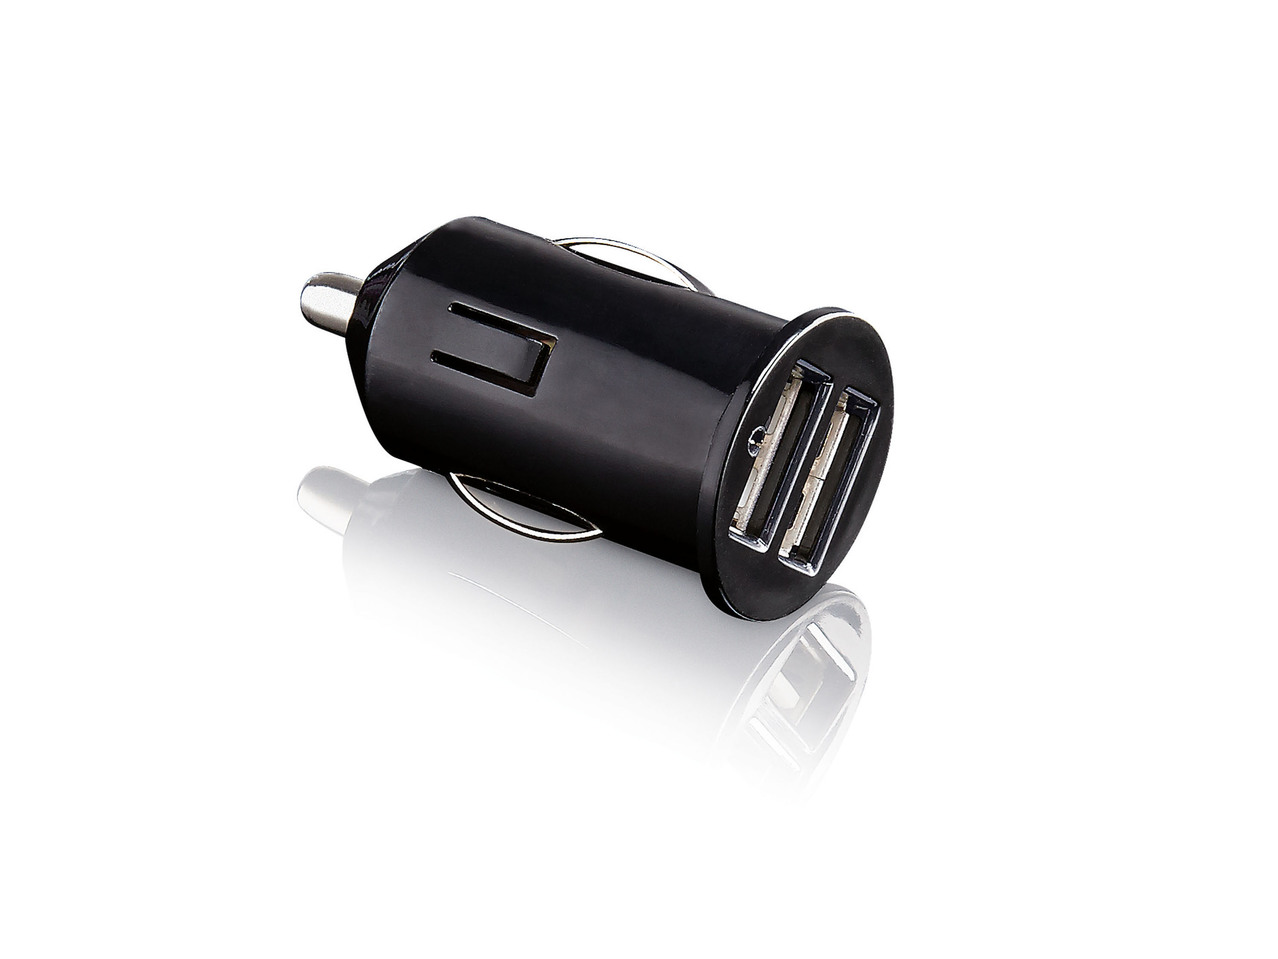 3-Way Car Splitter Adaptor or In-Car USB Charger, 12/24V